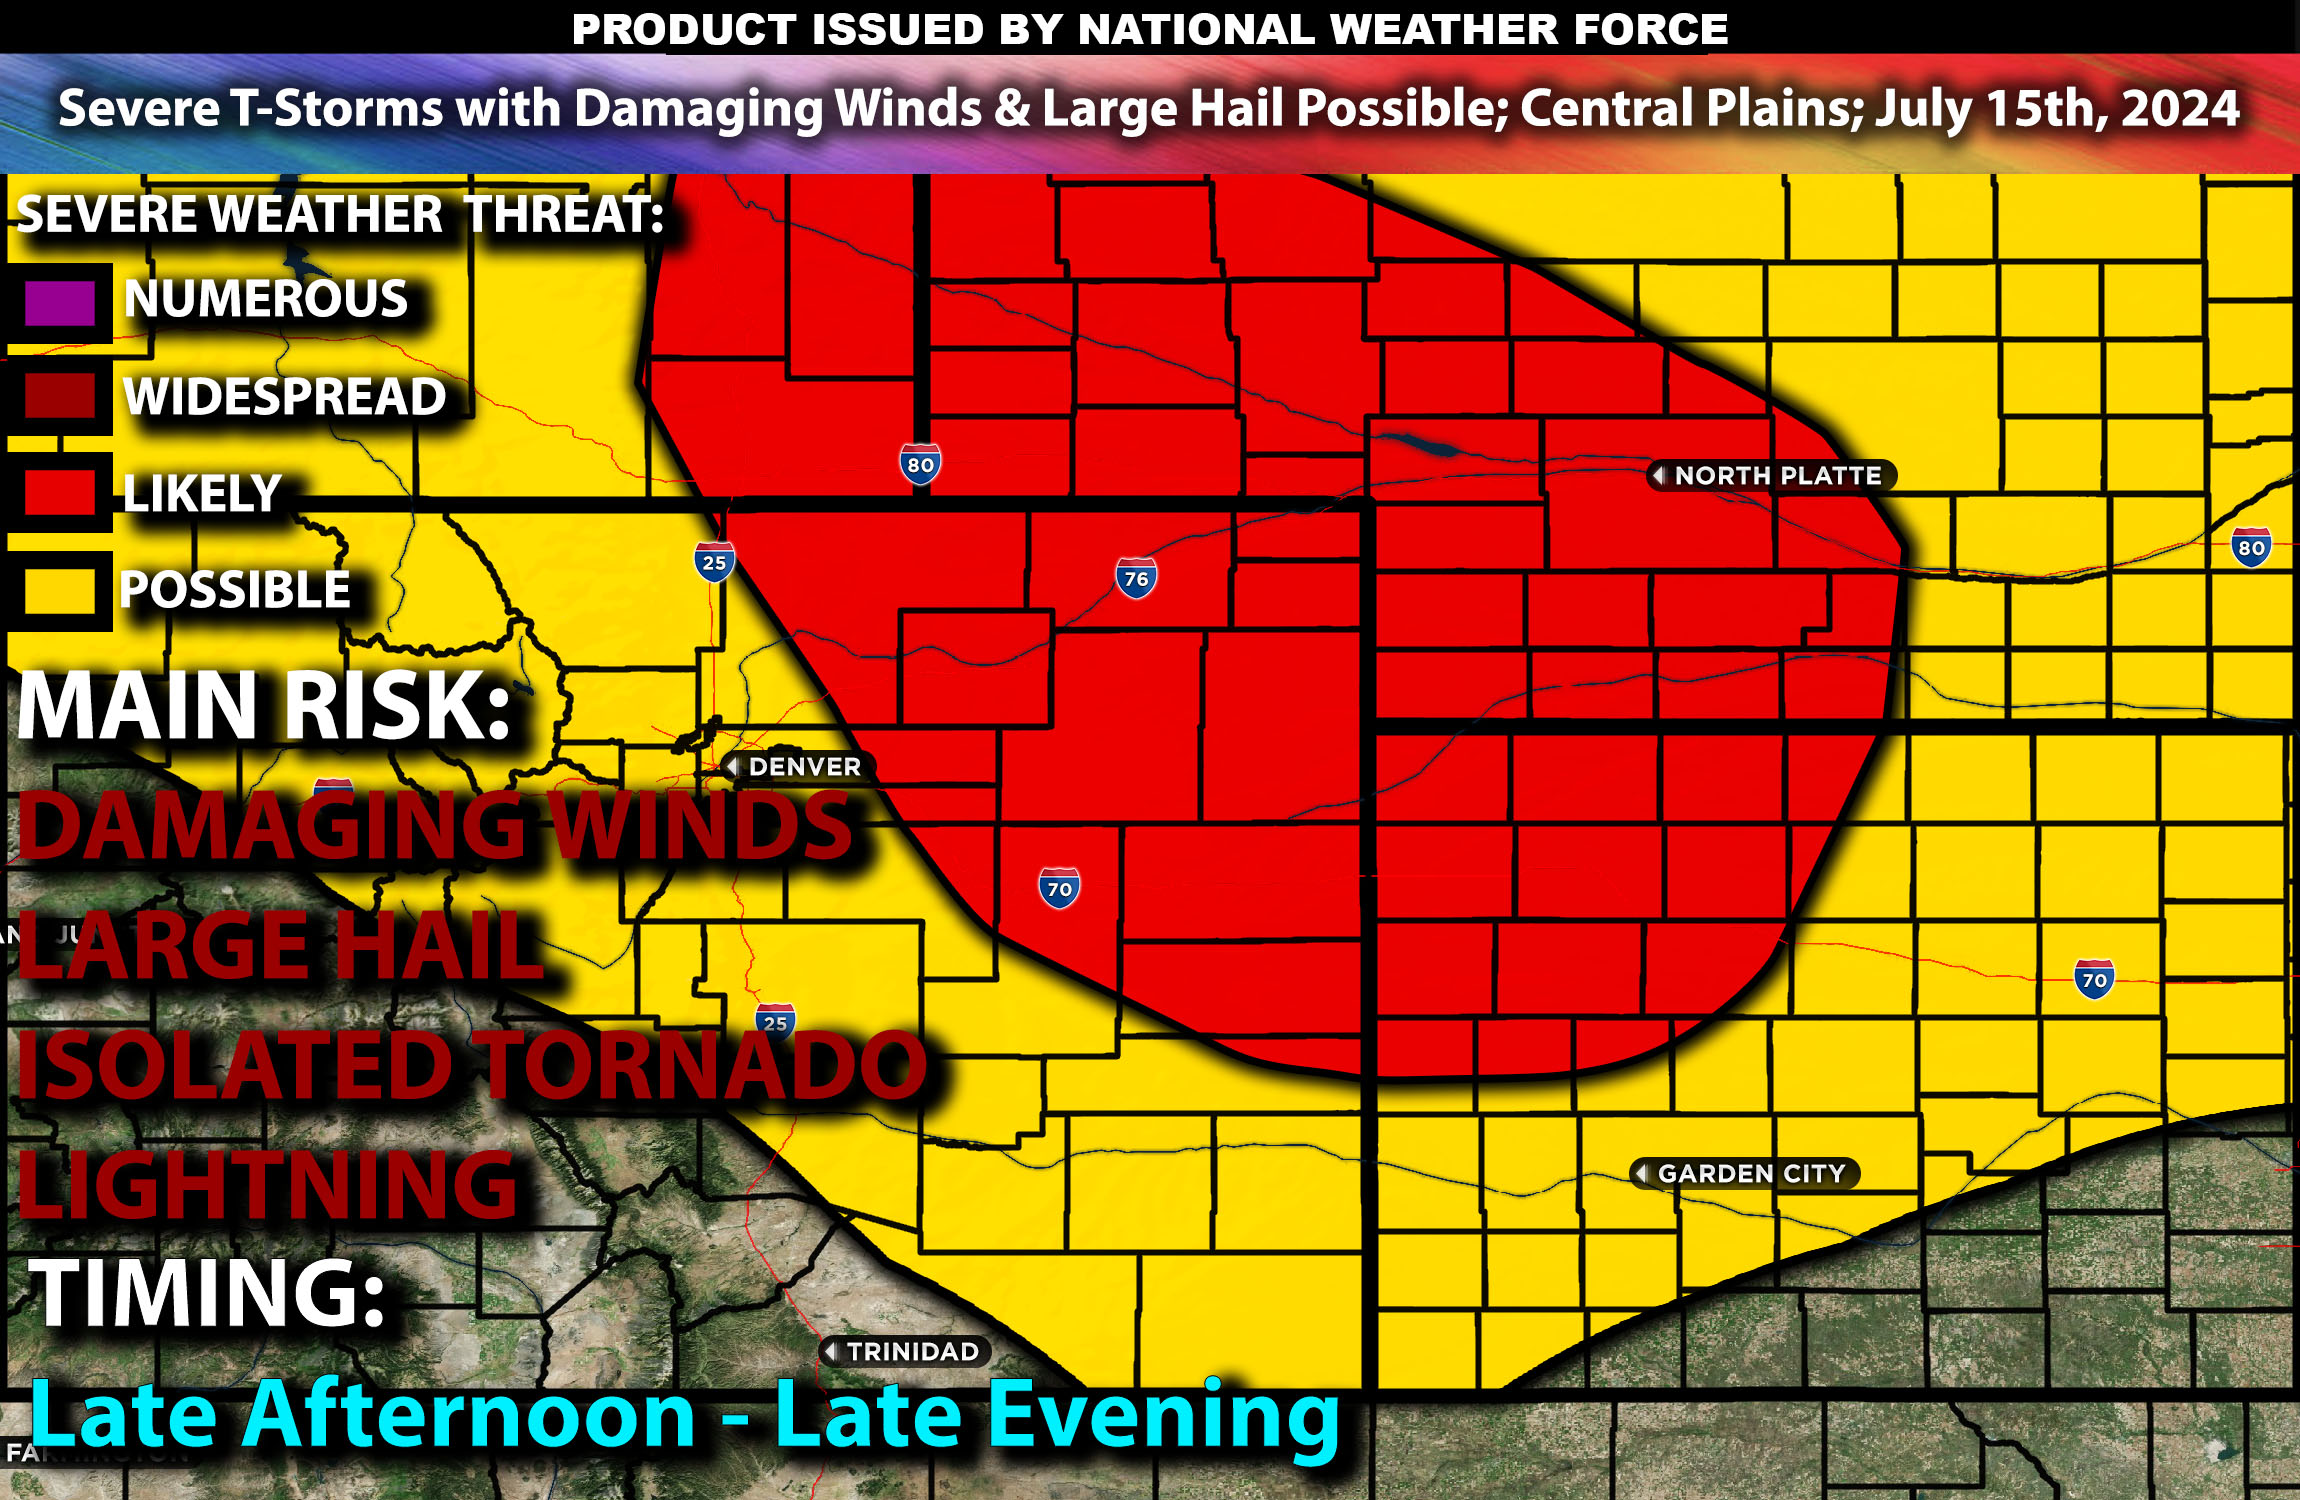 Severe Thunderstorms with Damaging Winds & Large Hail Possible in the Central Plains; July 15th, 2024